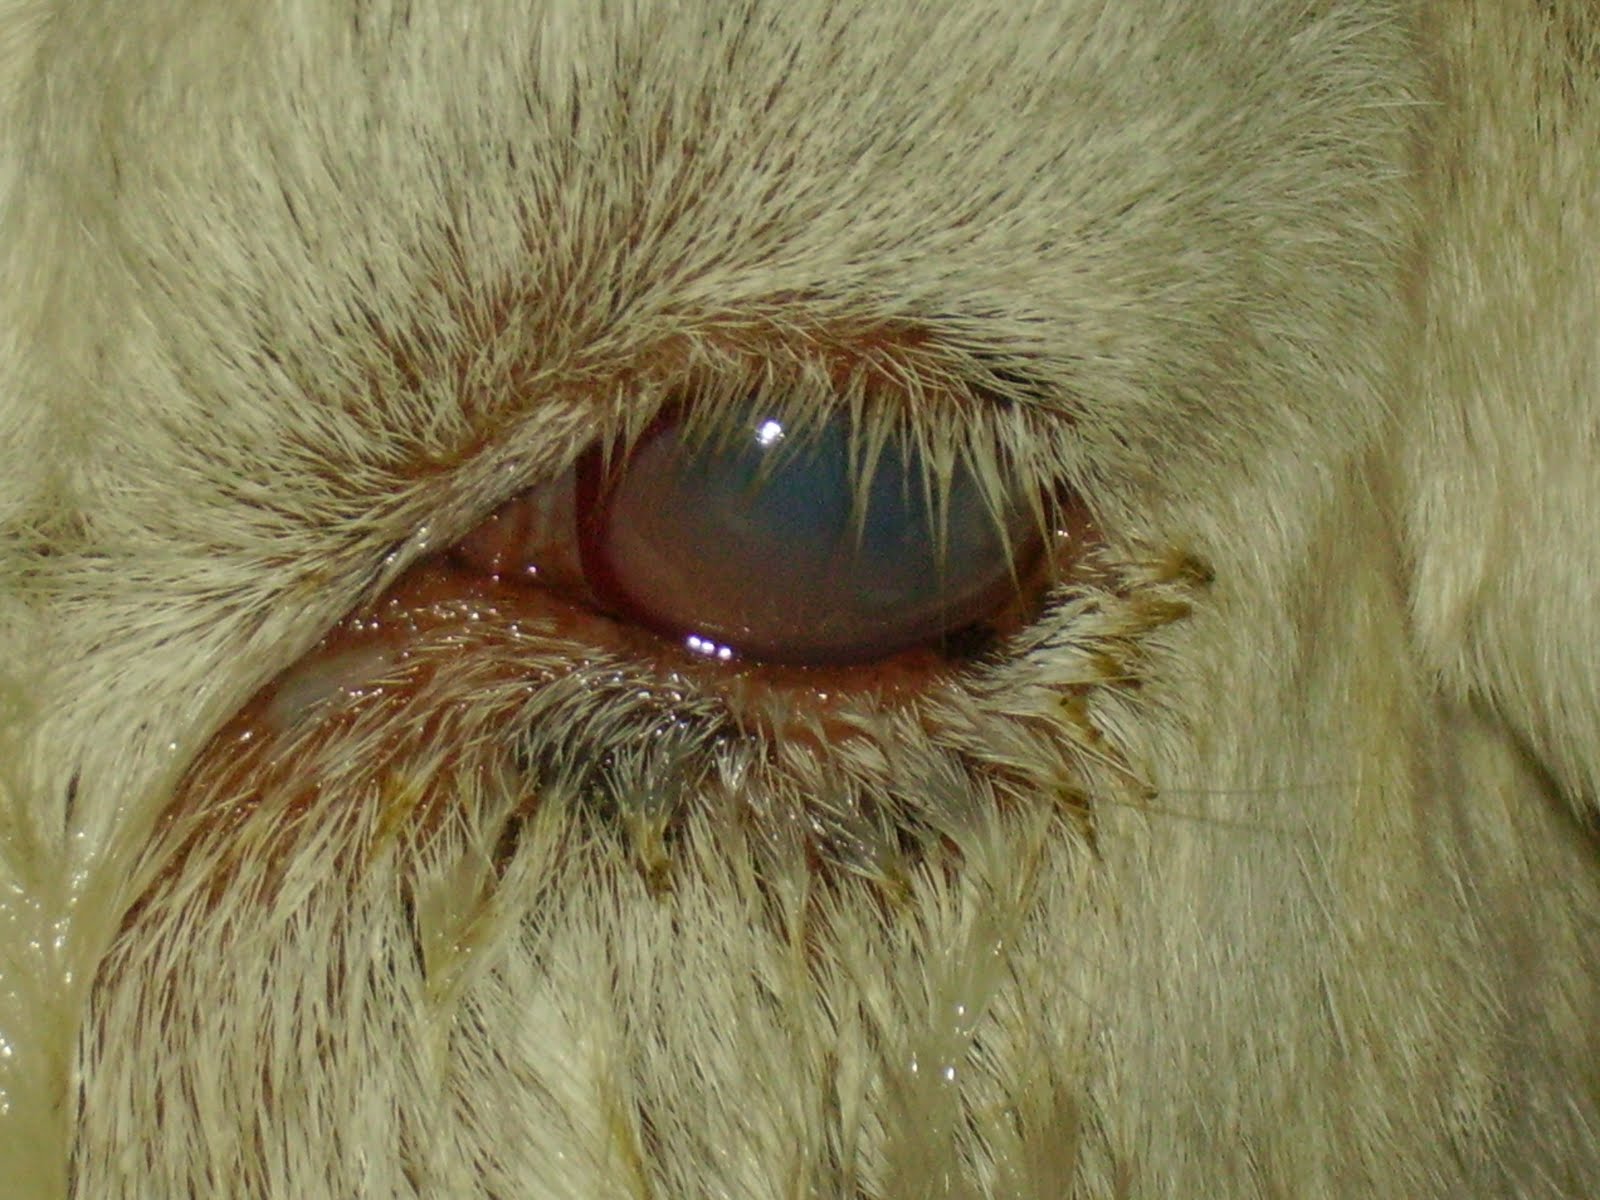 Study Suggests Pinkeye Incidents Can Be Reduced In Your Herd Through Careful Genetic Selection